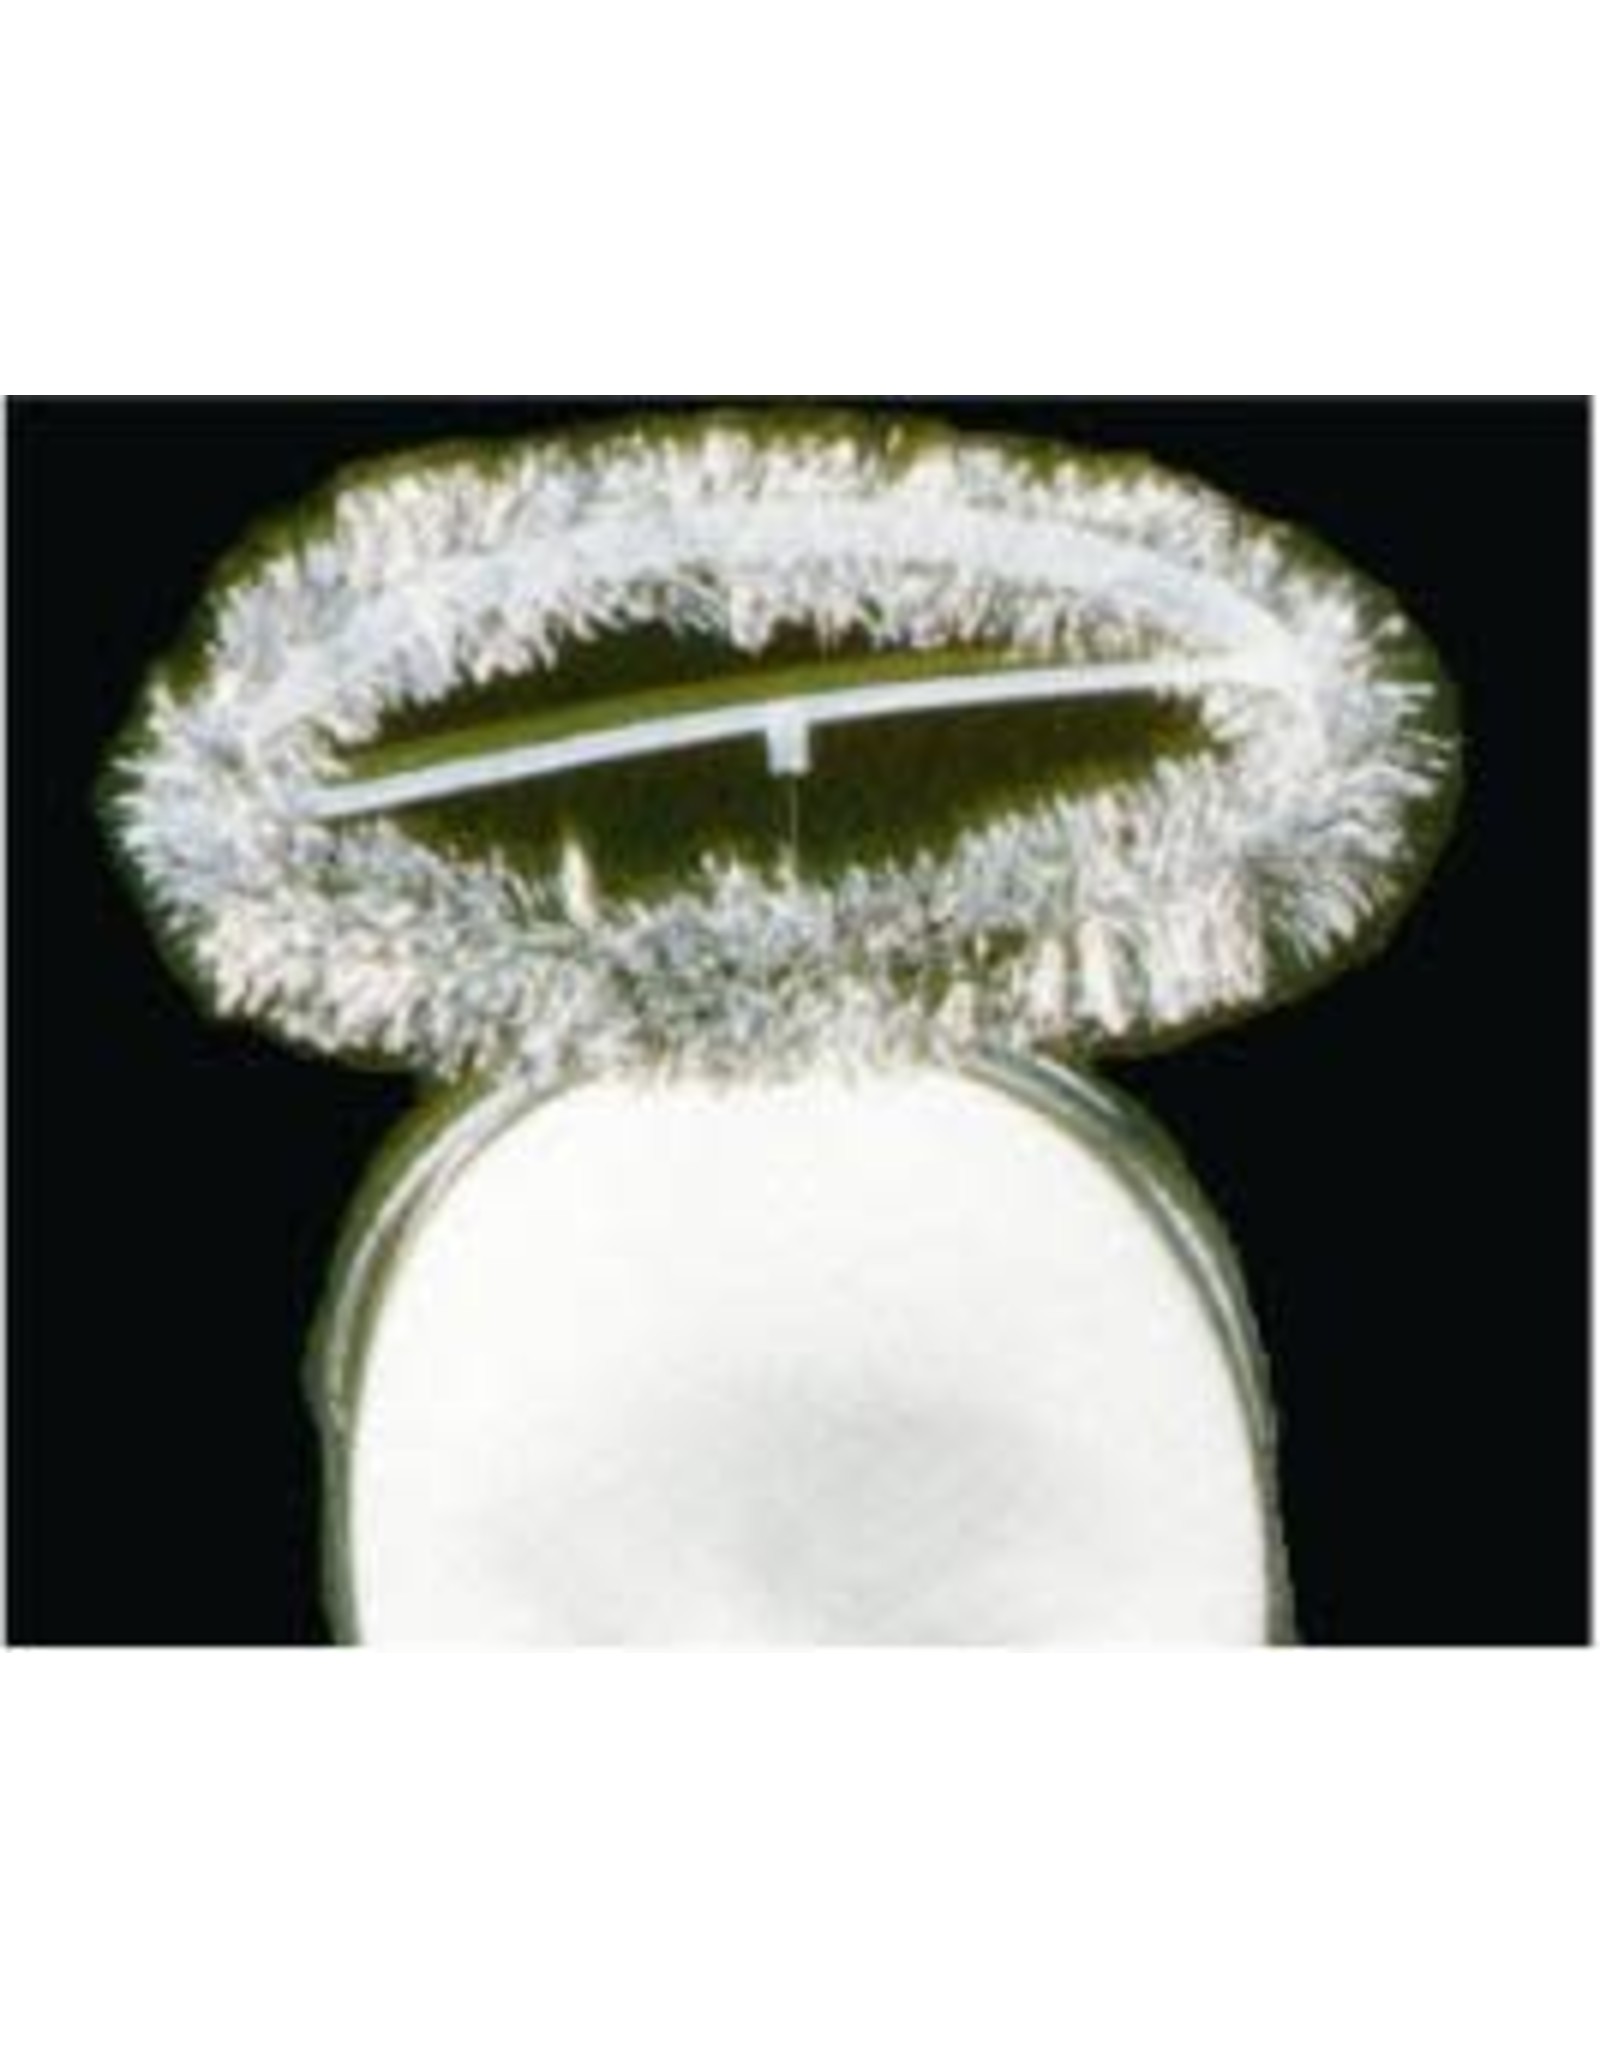 SKS Novelty Halo with Silver Tinsel